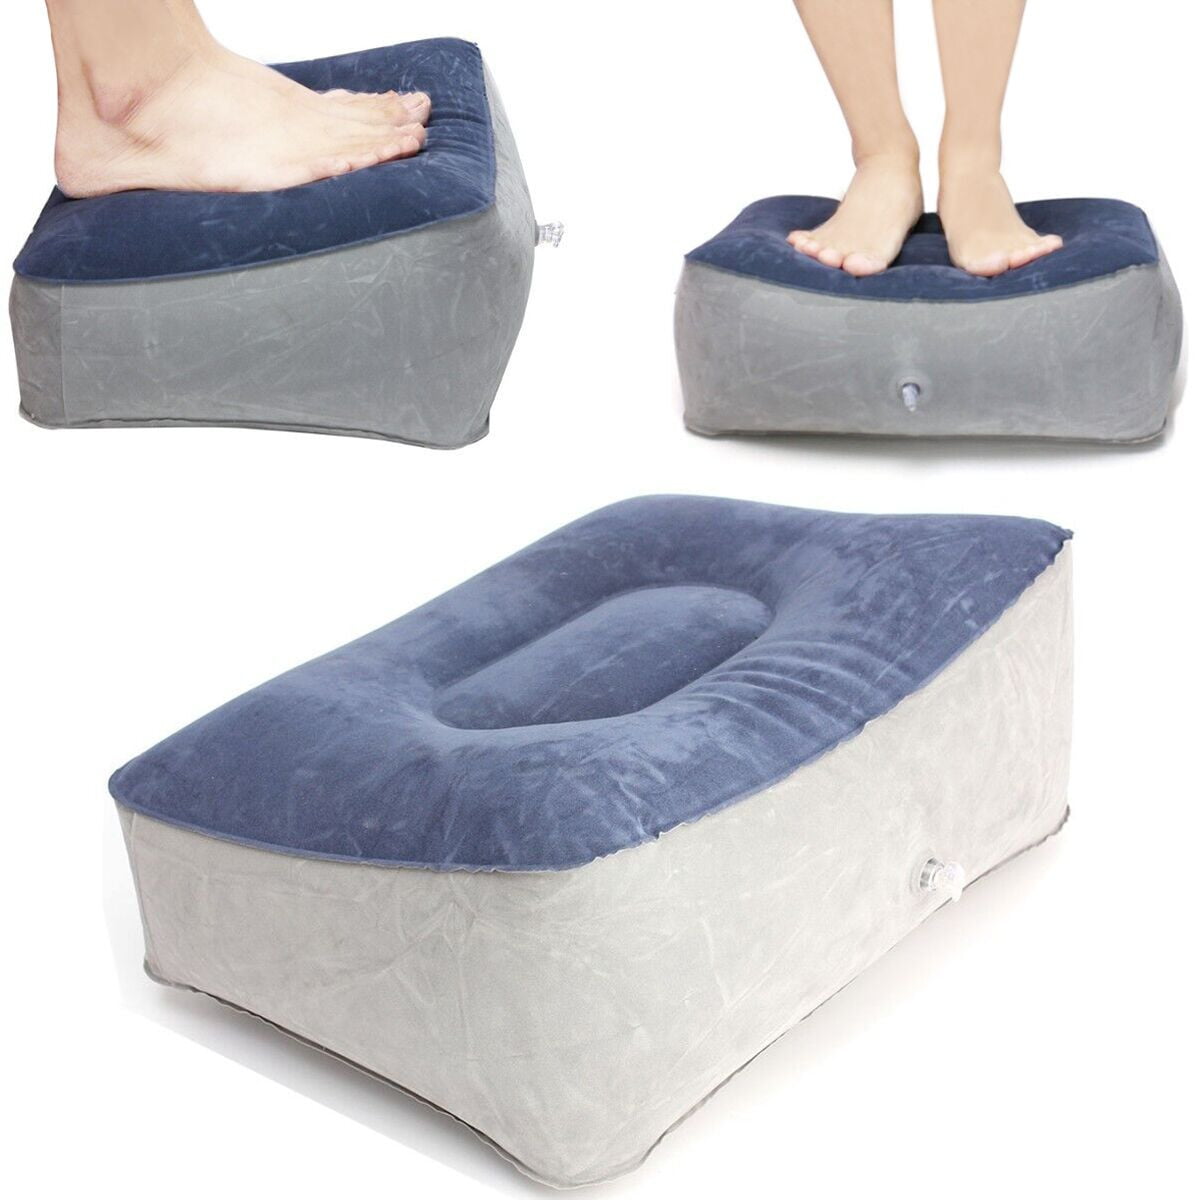 Foot Rest Pillow Inflatable Leg Footrest Cushion For Adults To Relax Cars Office Home Bed Kids Sleep Long Flight Flatable Multi-function Portable Car Train Mat Air Mattress Universal Rear Seat Self-dr 